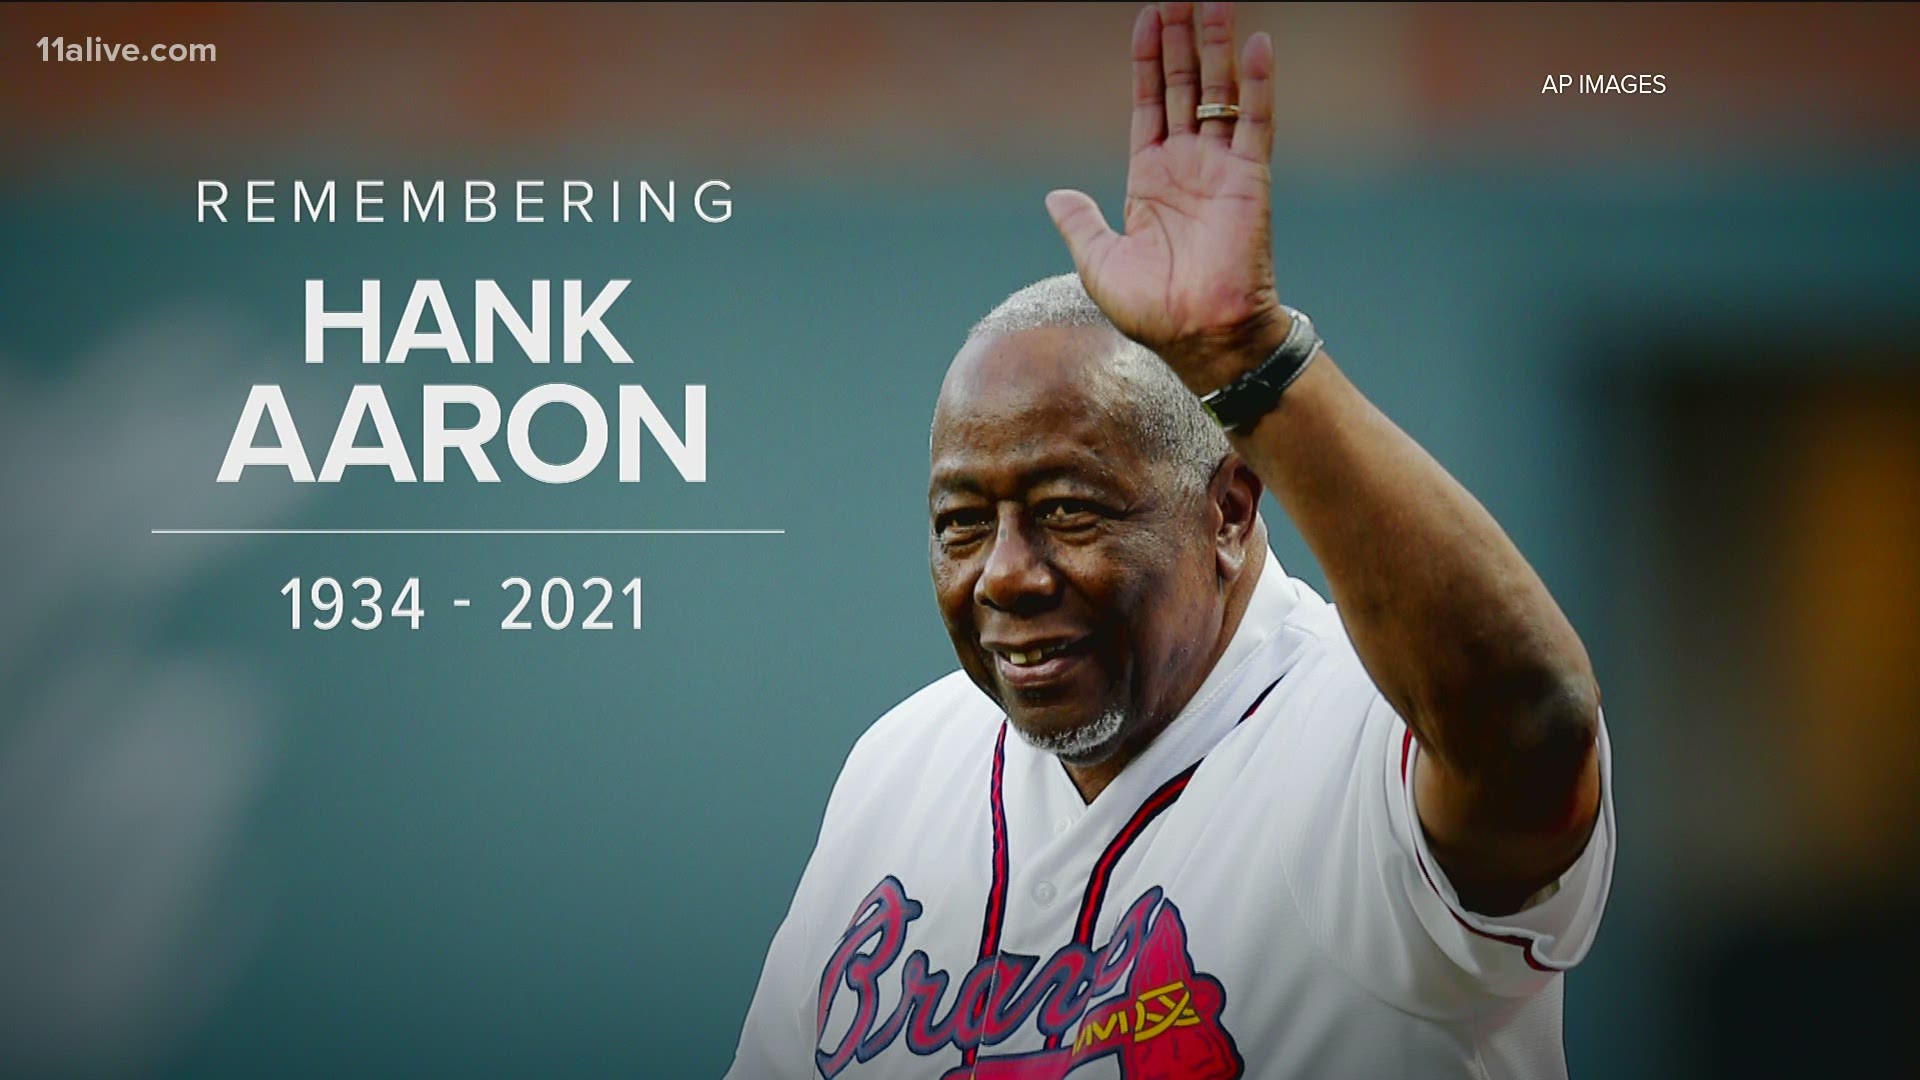 Friends, family and dignitaries gathered to say one final good-bye to Hank Aaron.